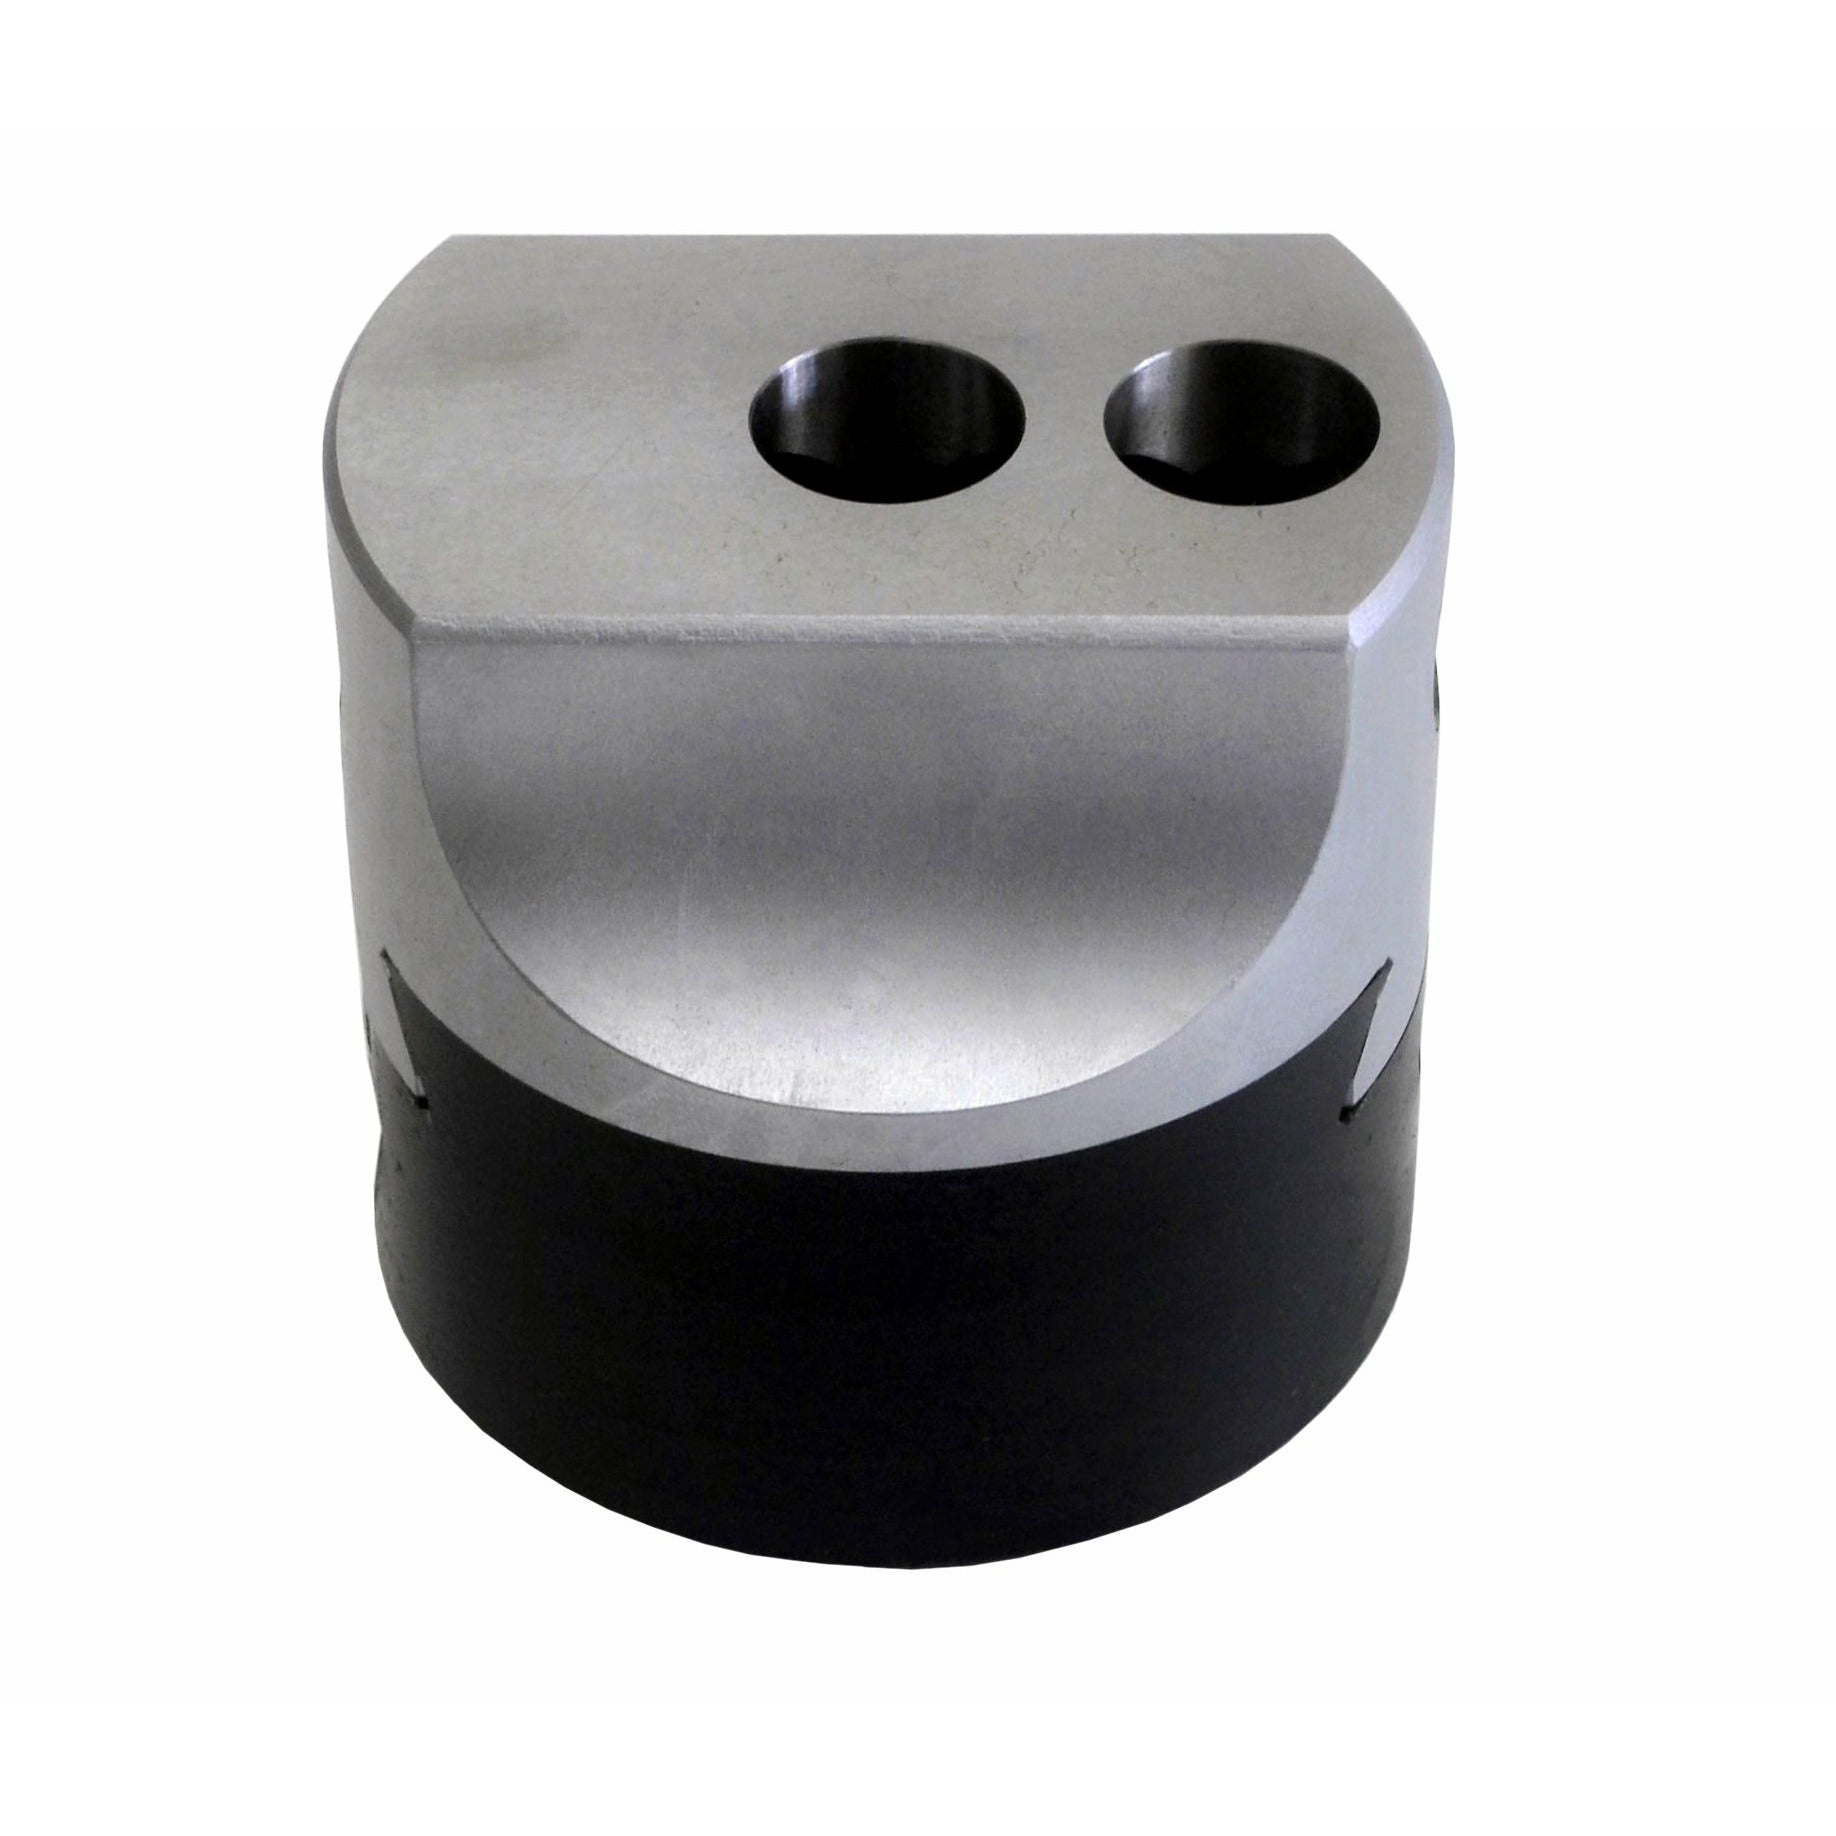 3" 75mm Boring head with 1.5"x18 TPI